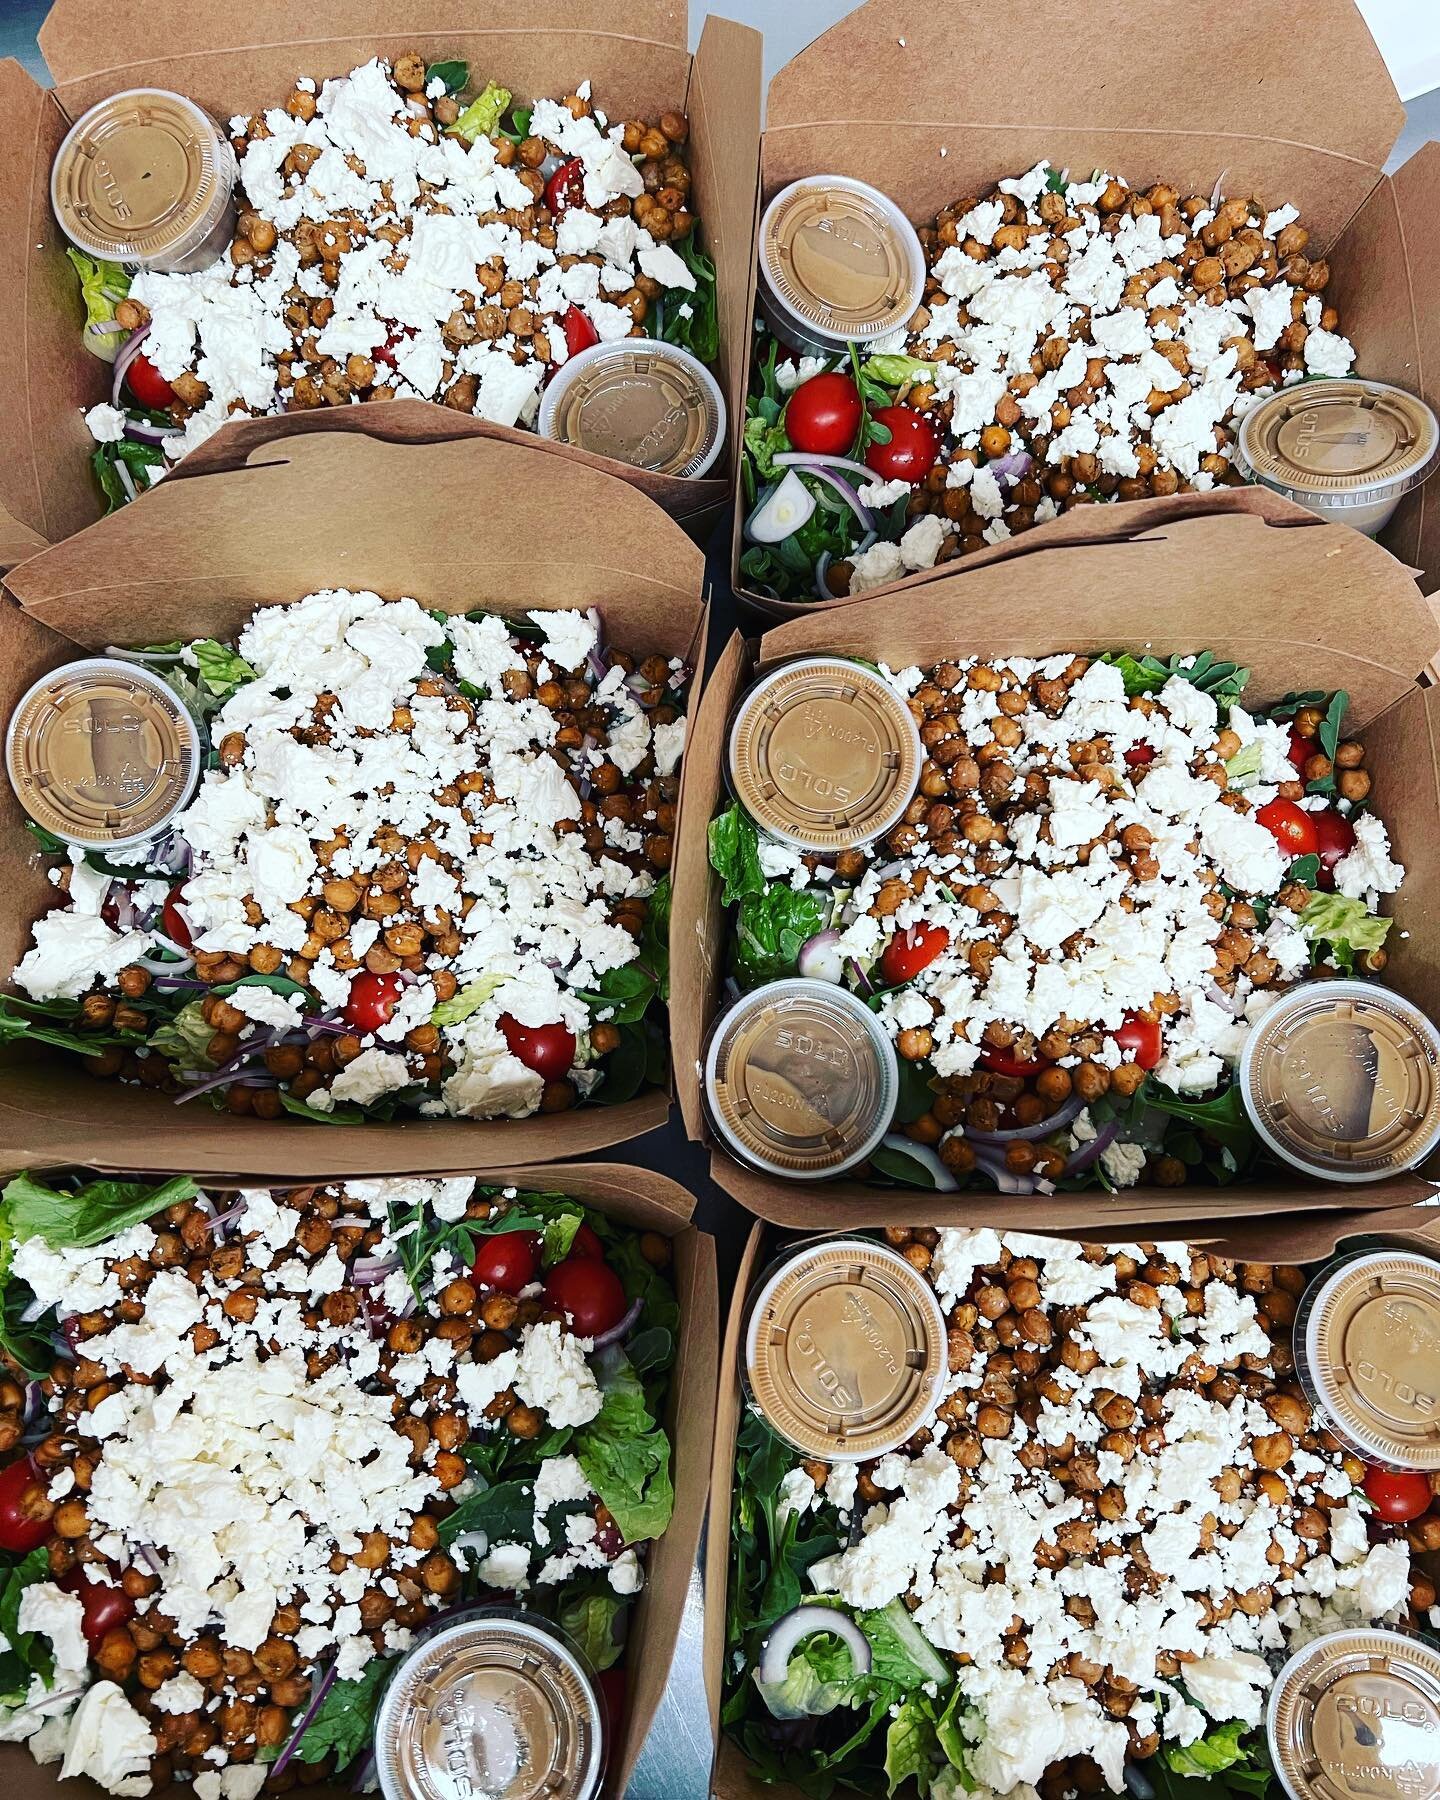 Monday Salad extravaganza! Sinach, toasted chickpea, feta, tomato &amp; balsamic for our meal delivery clients, and our Fioreous Salad Bar for a corporate meeting @avlchamber.
#fioreouslydelicious #mealdelivery #healthymealdelivery #corporatecaterer 